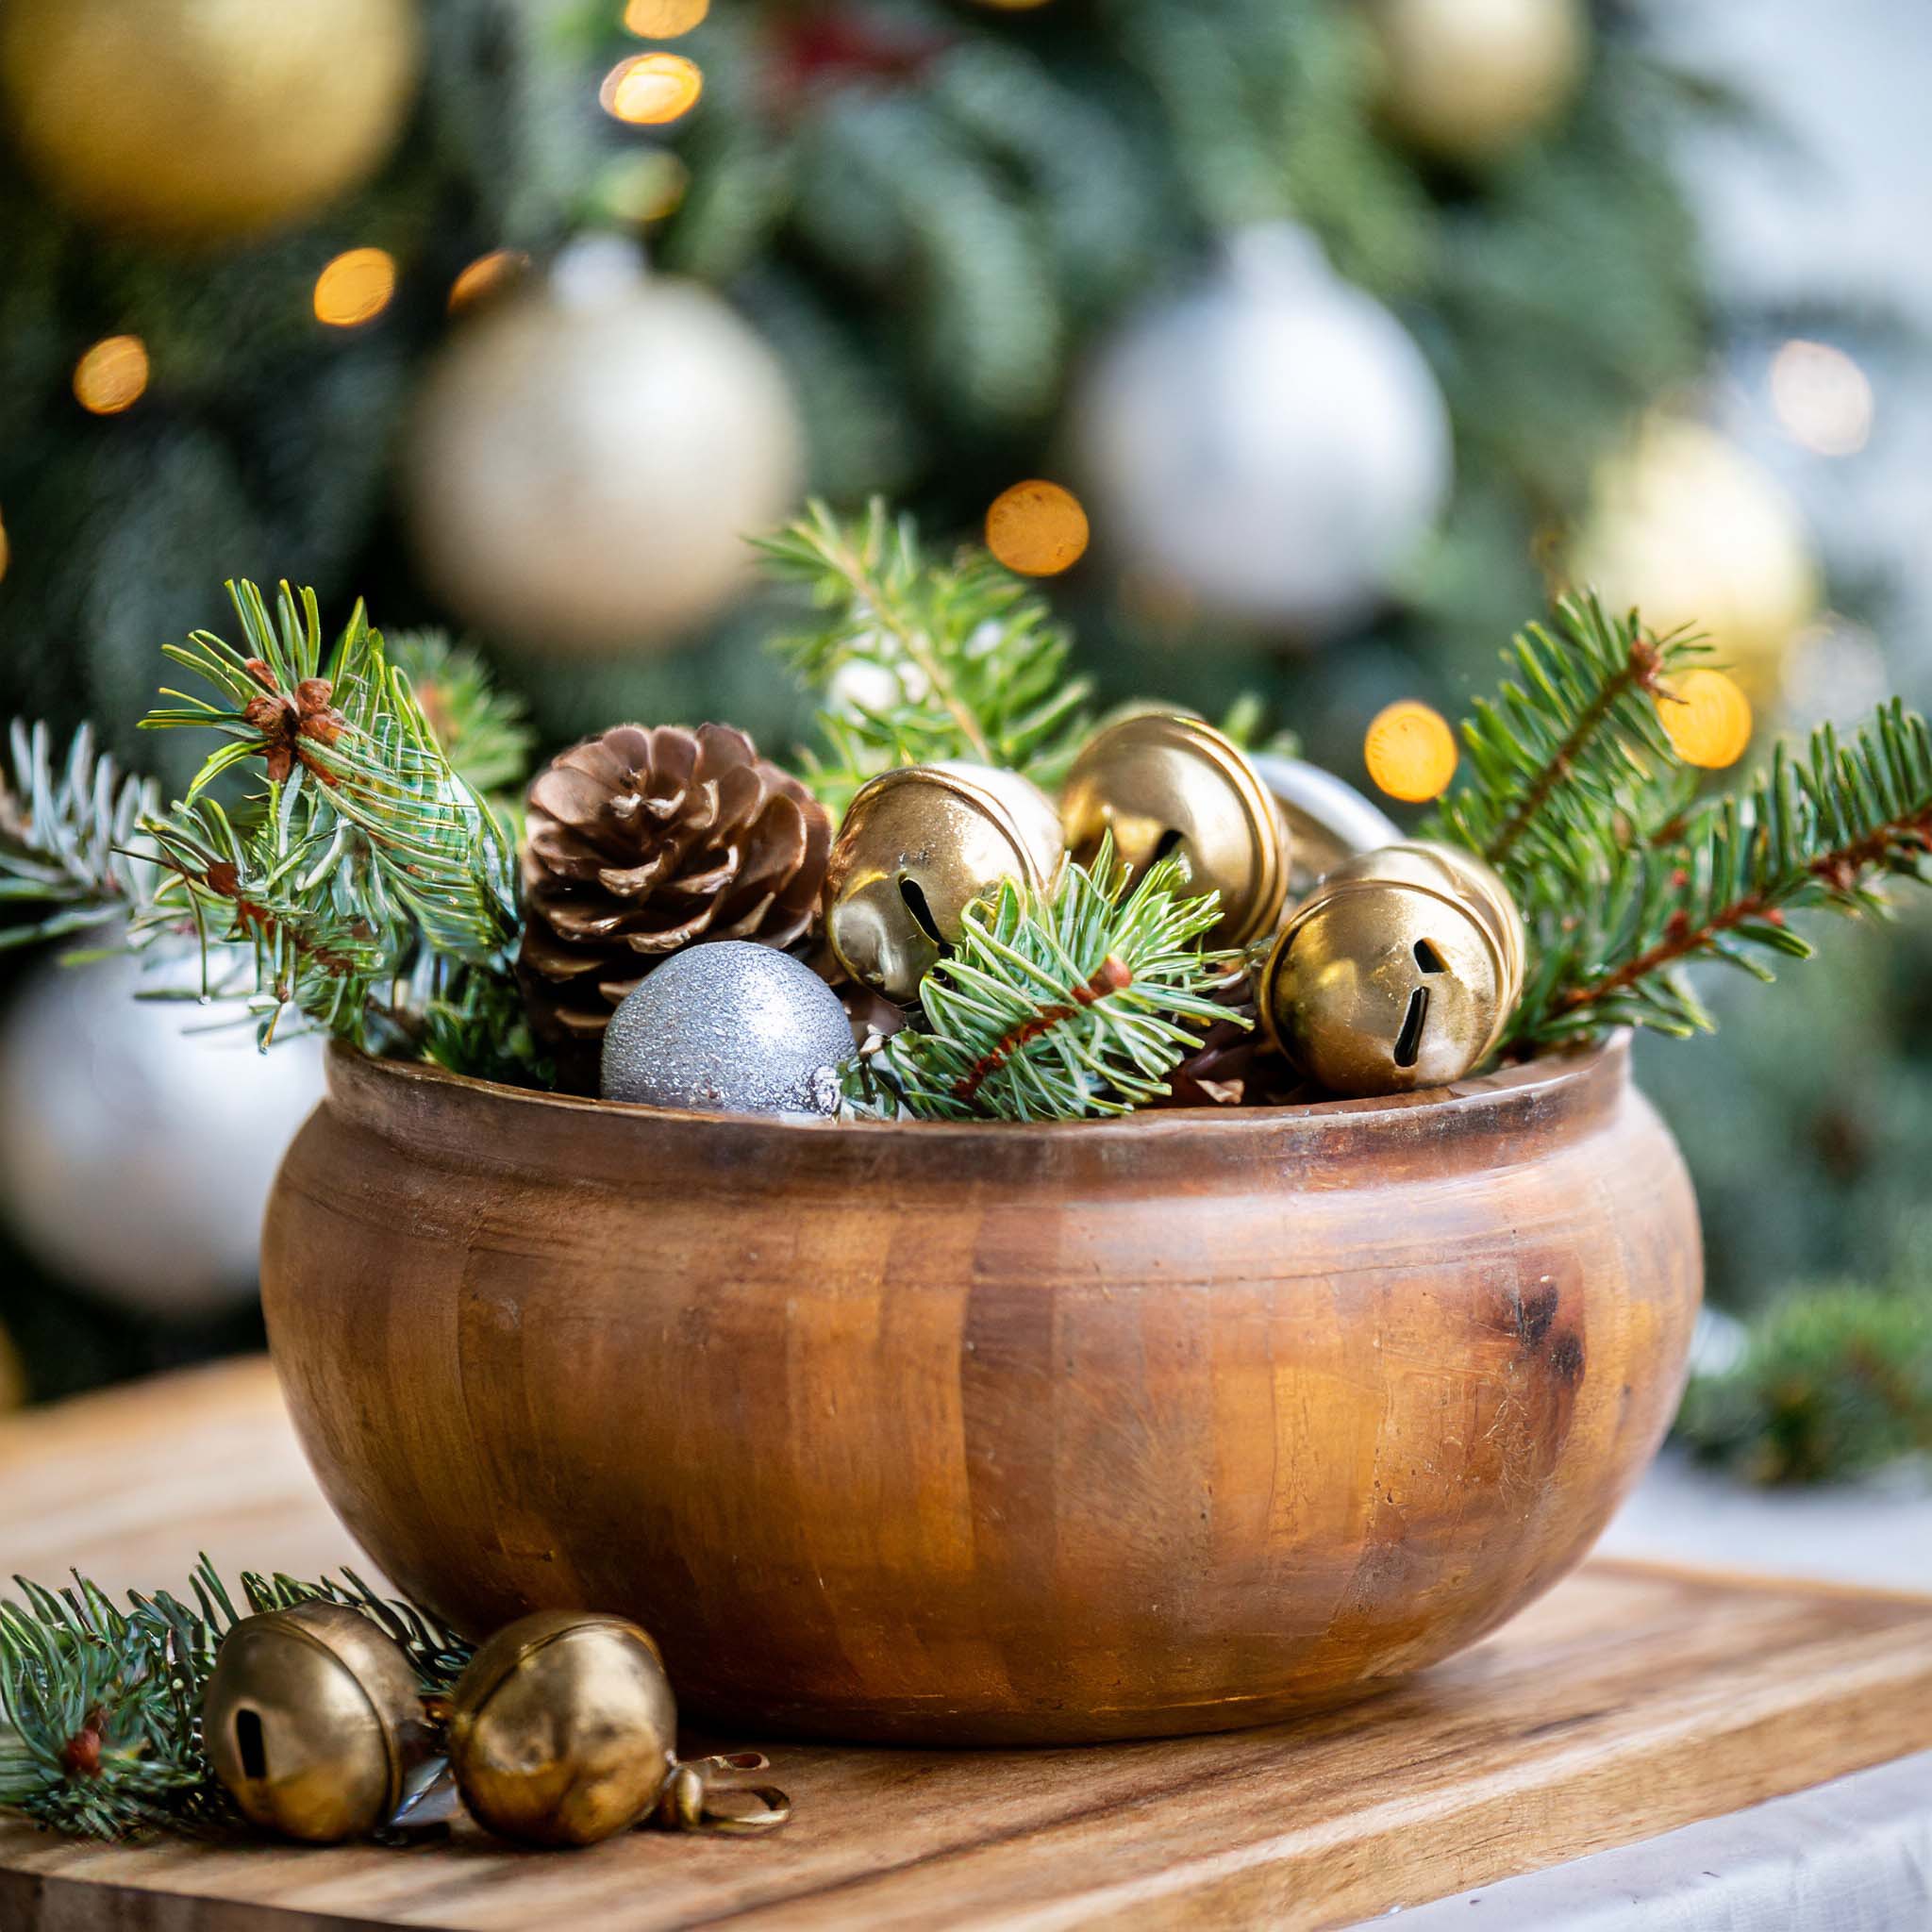 Wooden dough bowl filled with brass jingle bells, ornaments, and pine branches.